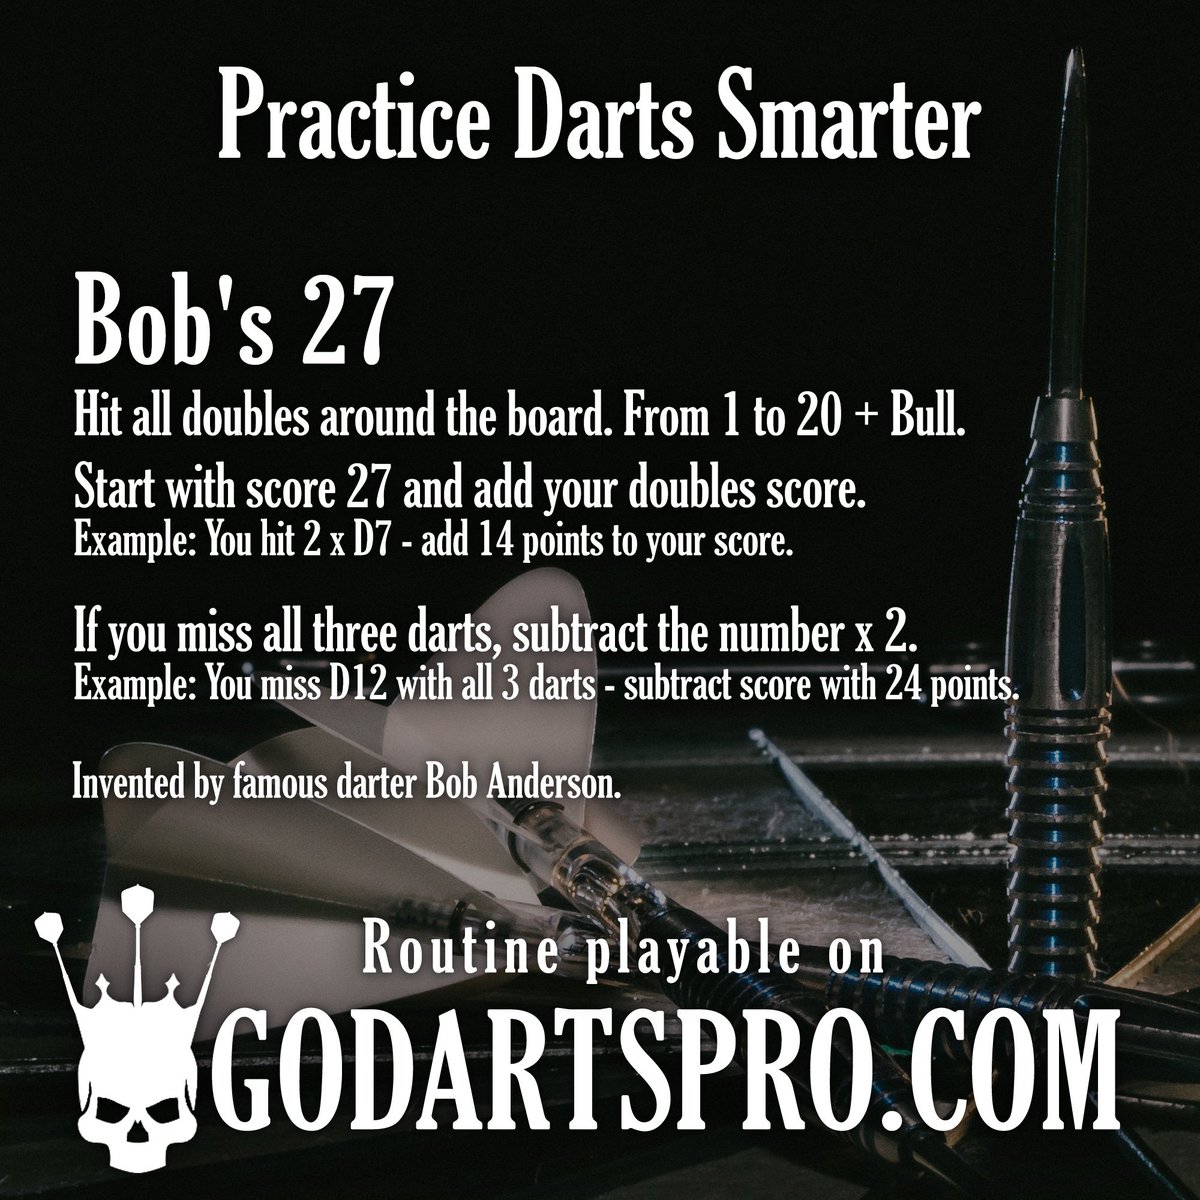 GoDartsPro.com on Twitter: "Tried Bob's 27 Famous darts practice routine sharpen your doubles skills. By Bob Anderson. Practice it on https://t.co/iCdgHCXIJS. https://t.co/TxkGteezdU #darts #practicedarts #lovethedarts #bobs27 https://t.co ...